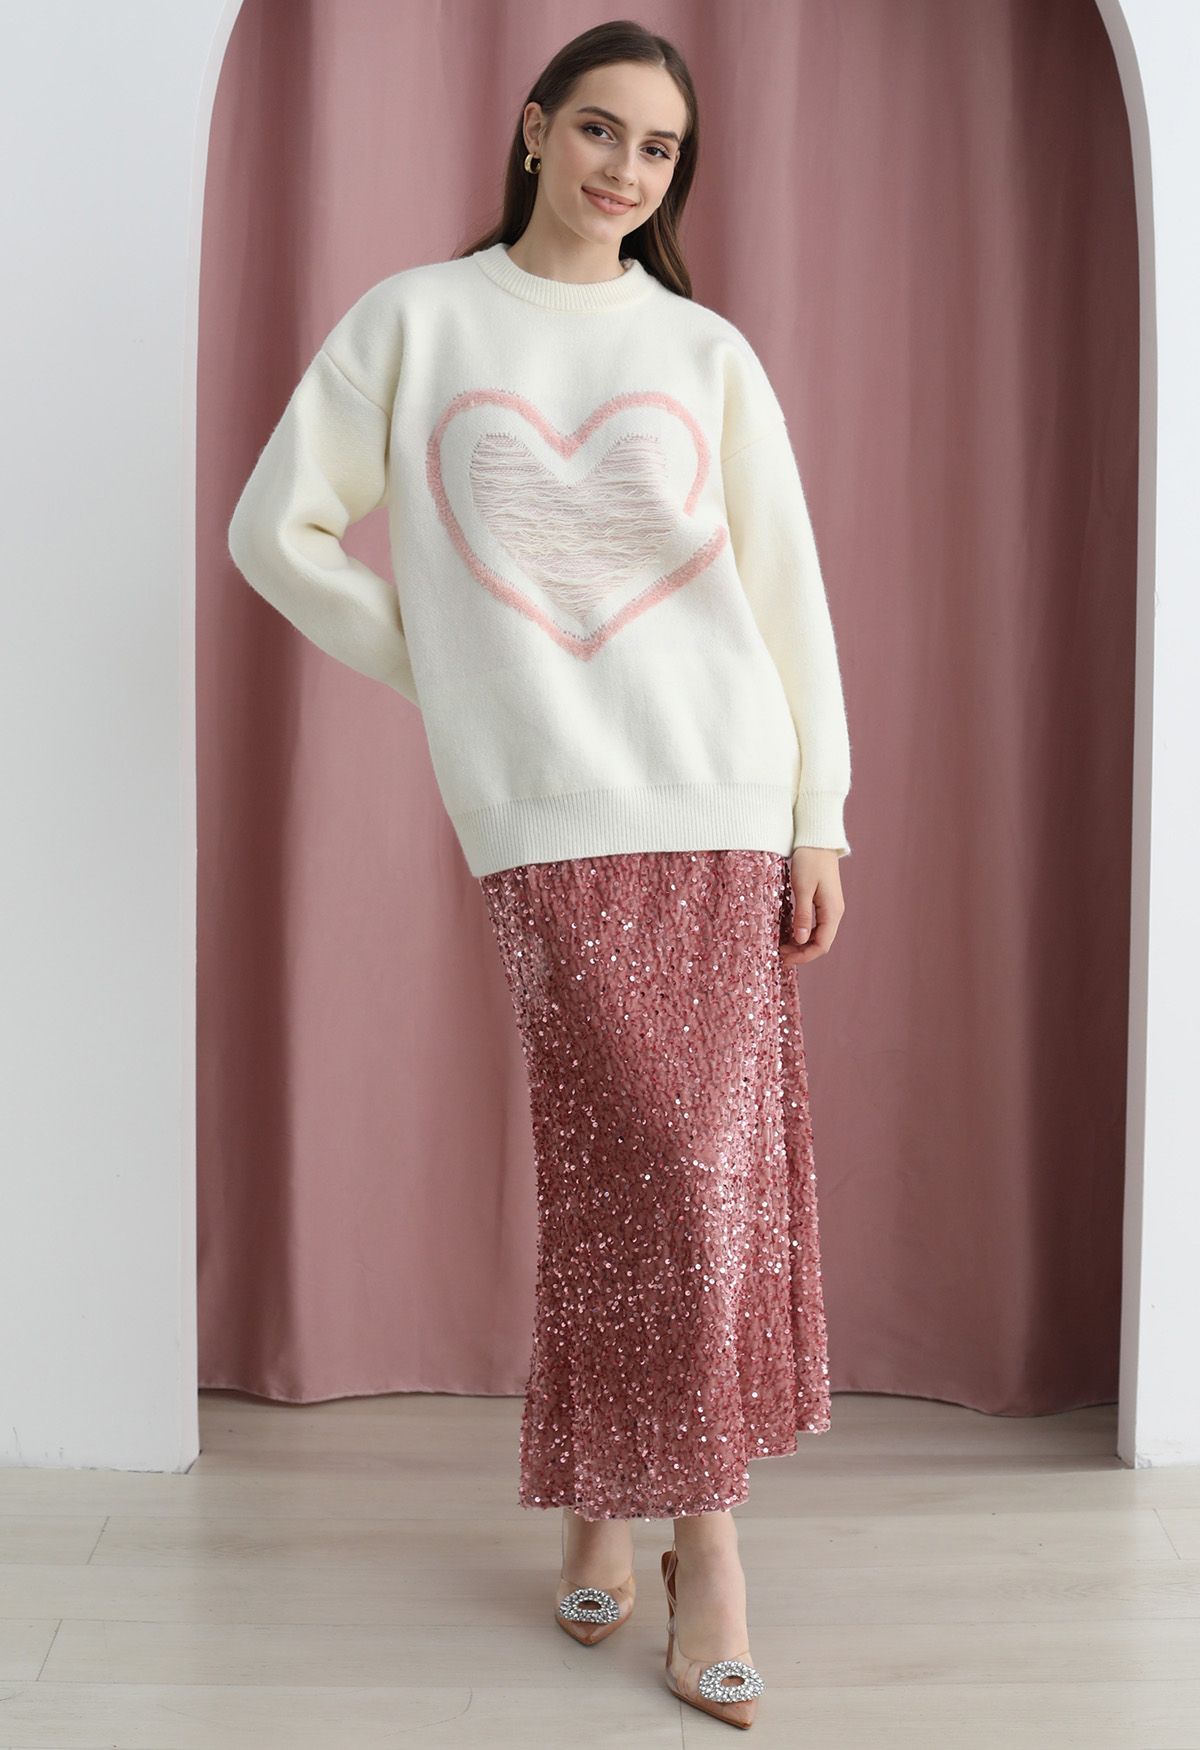 Ripped Heart Snug Knit Sweater in Ivory